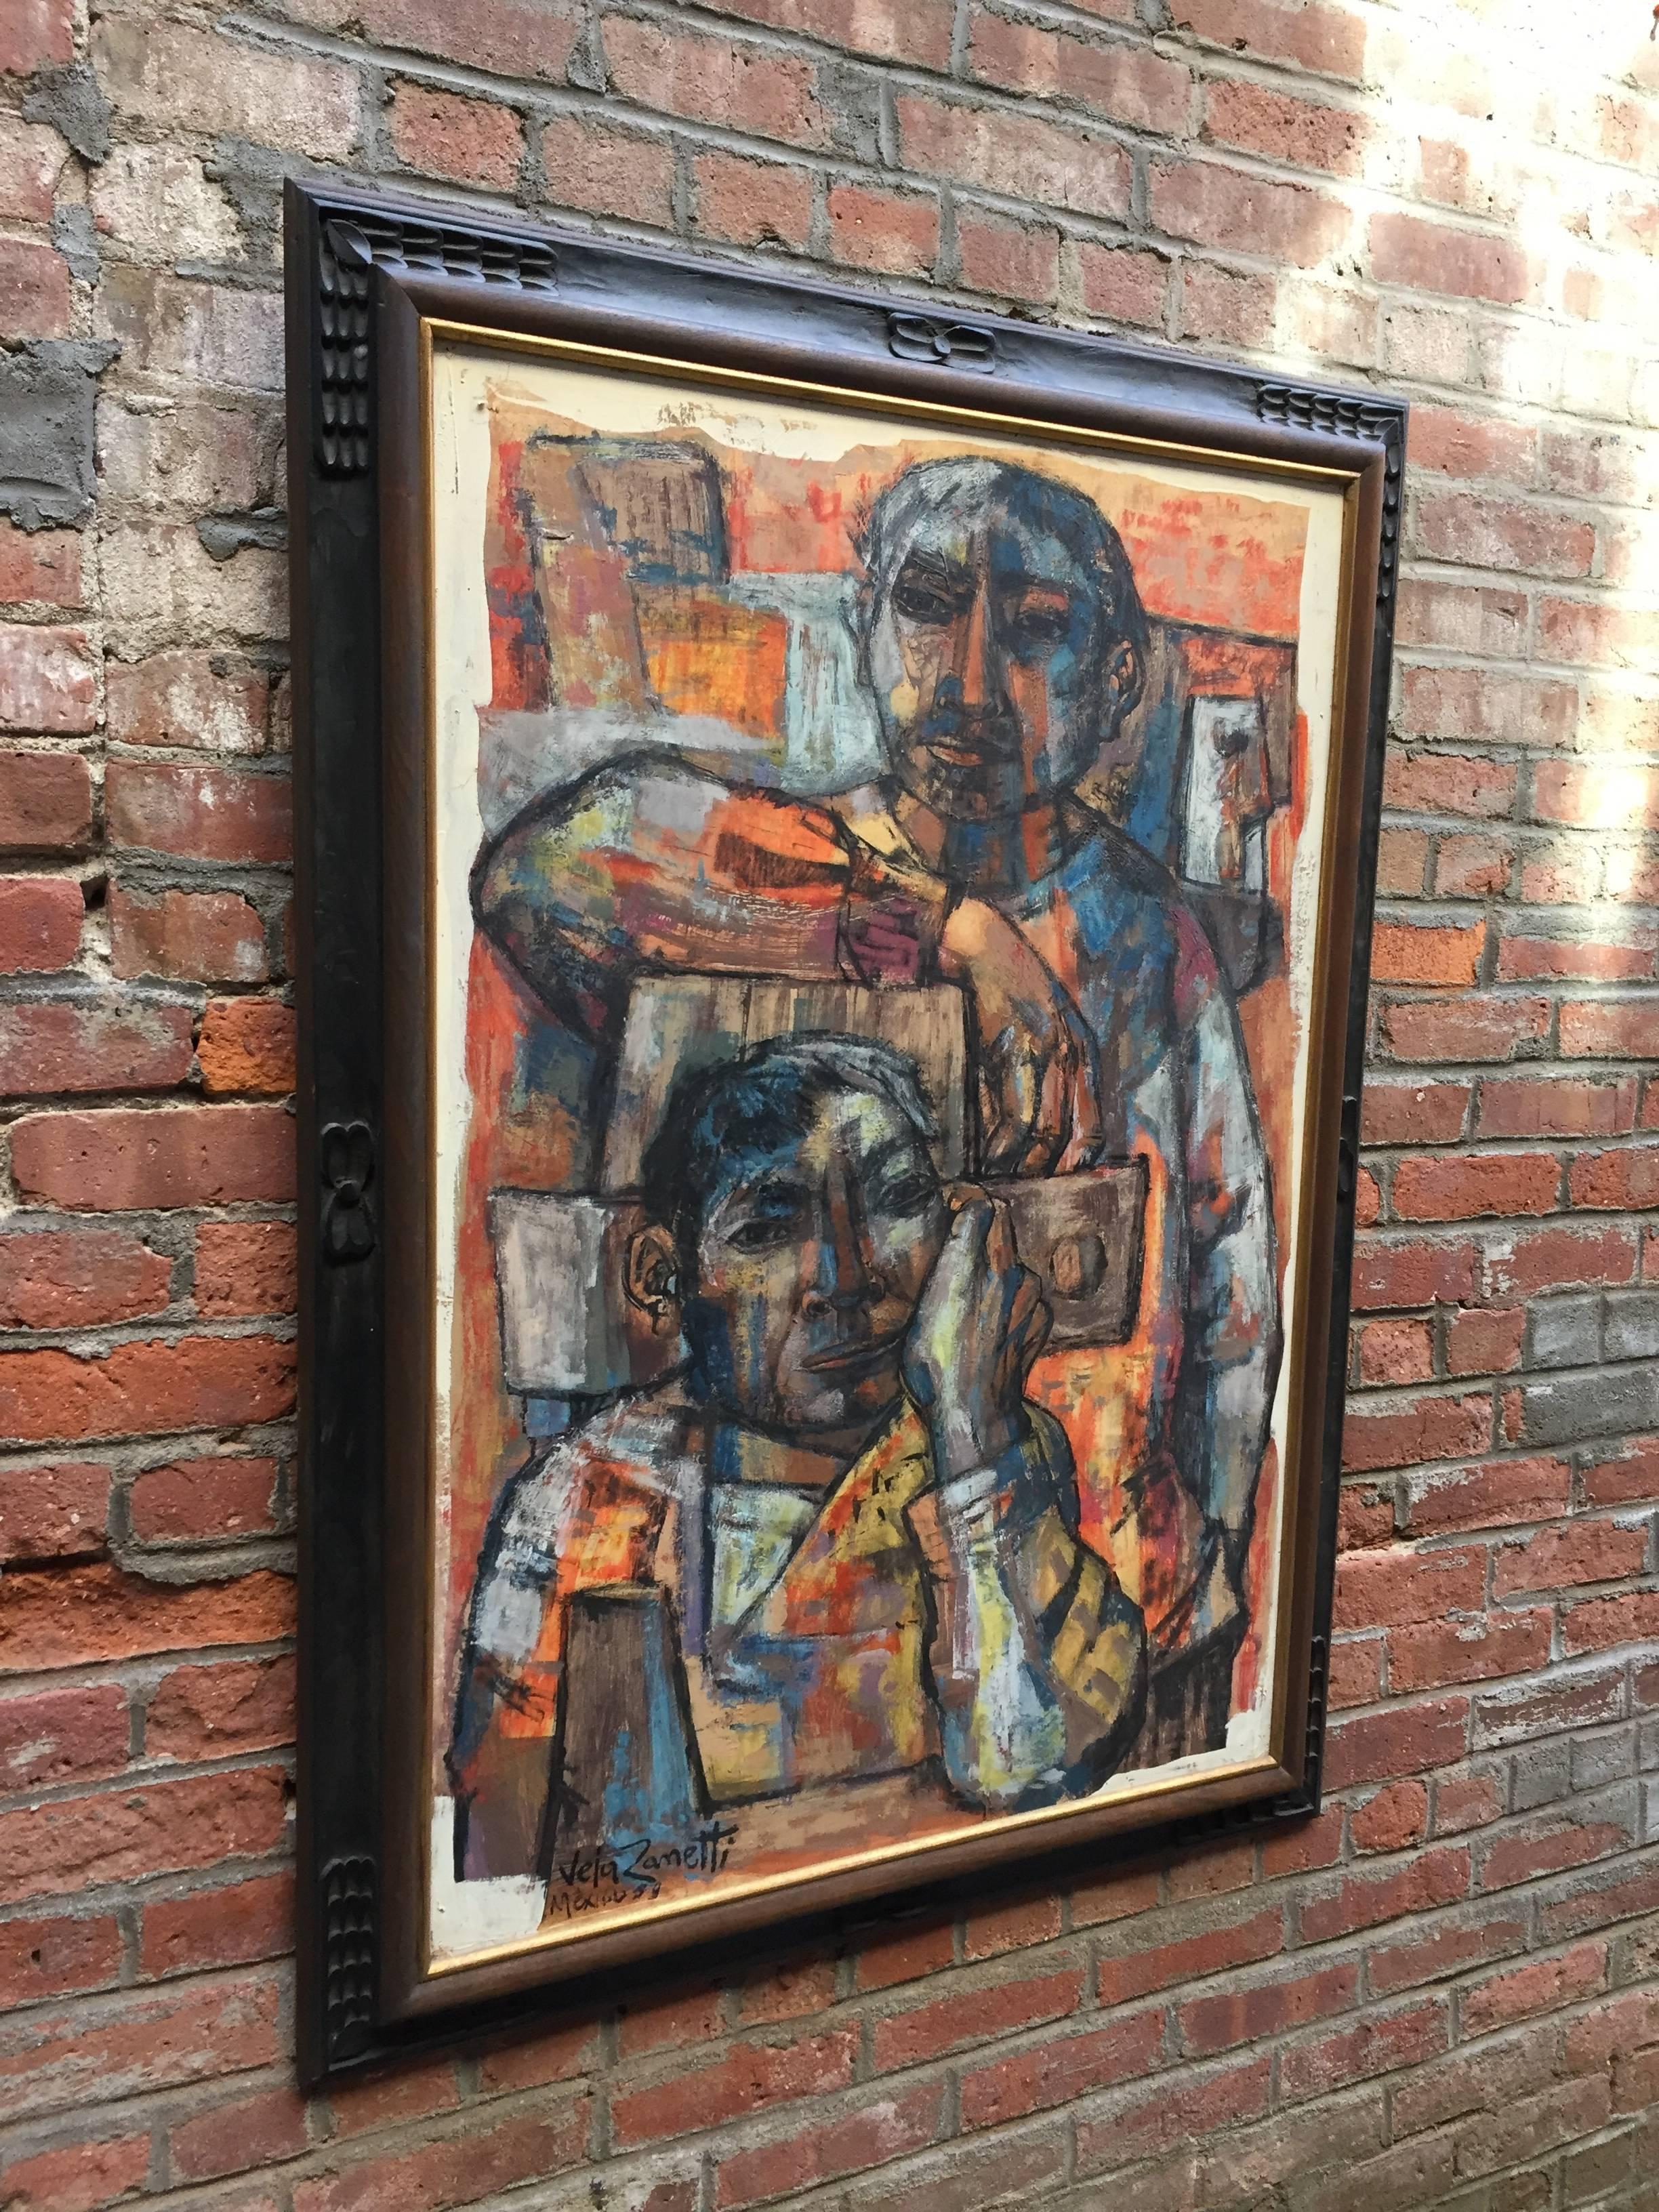 A wonderful depiction of two male figures by Spanish artist, Jose Vela Zanetti. The medium is oil paint on board. Signed lower left, Vela Zanetti, Mexico, 1958. The piece is framed in a hand-carved Mexican frame. The piece measures 29